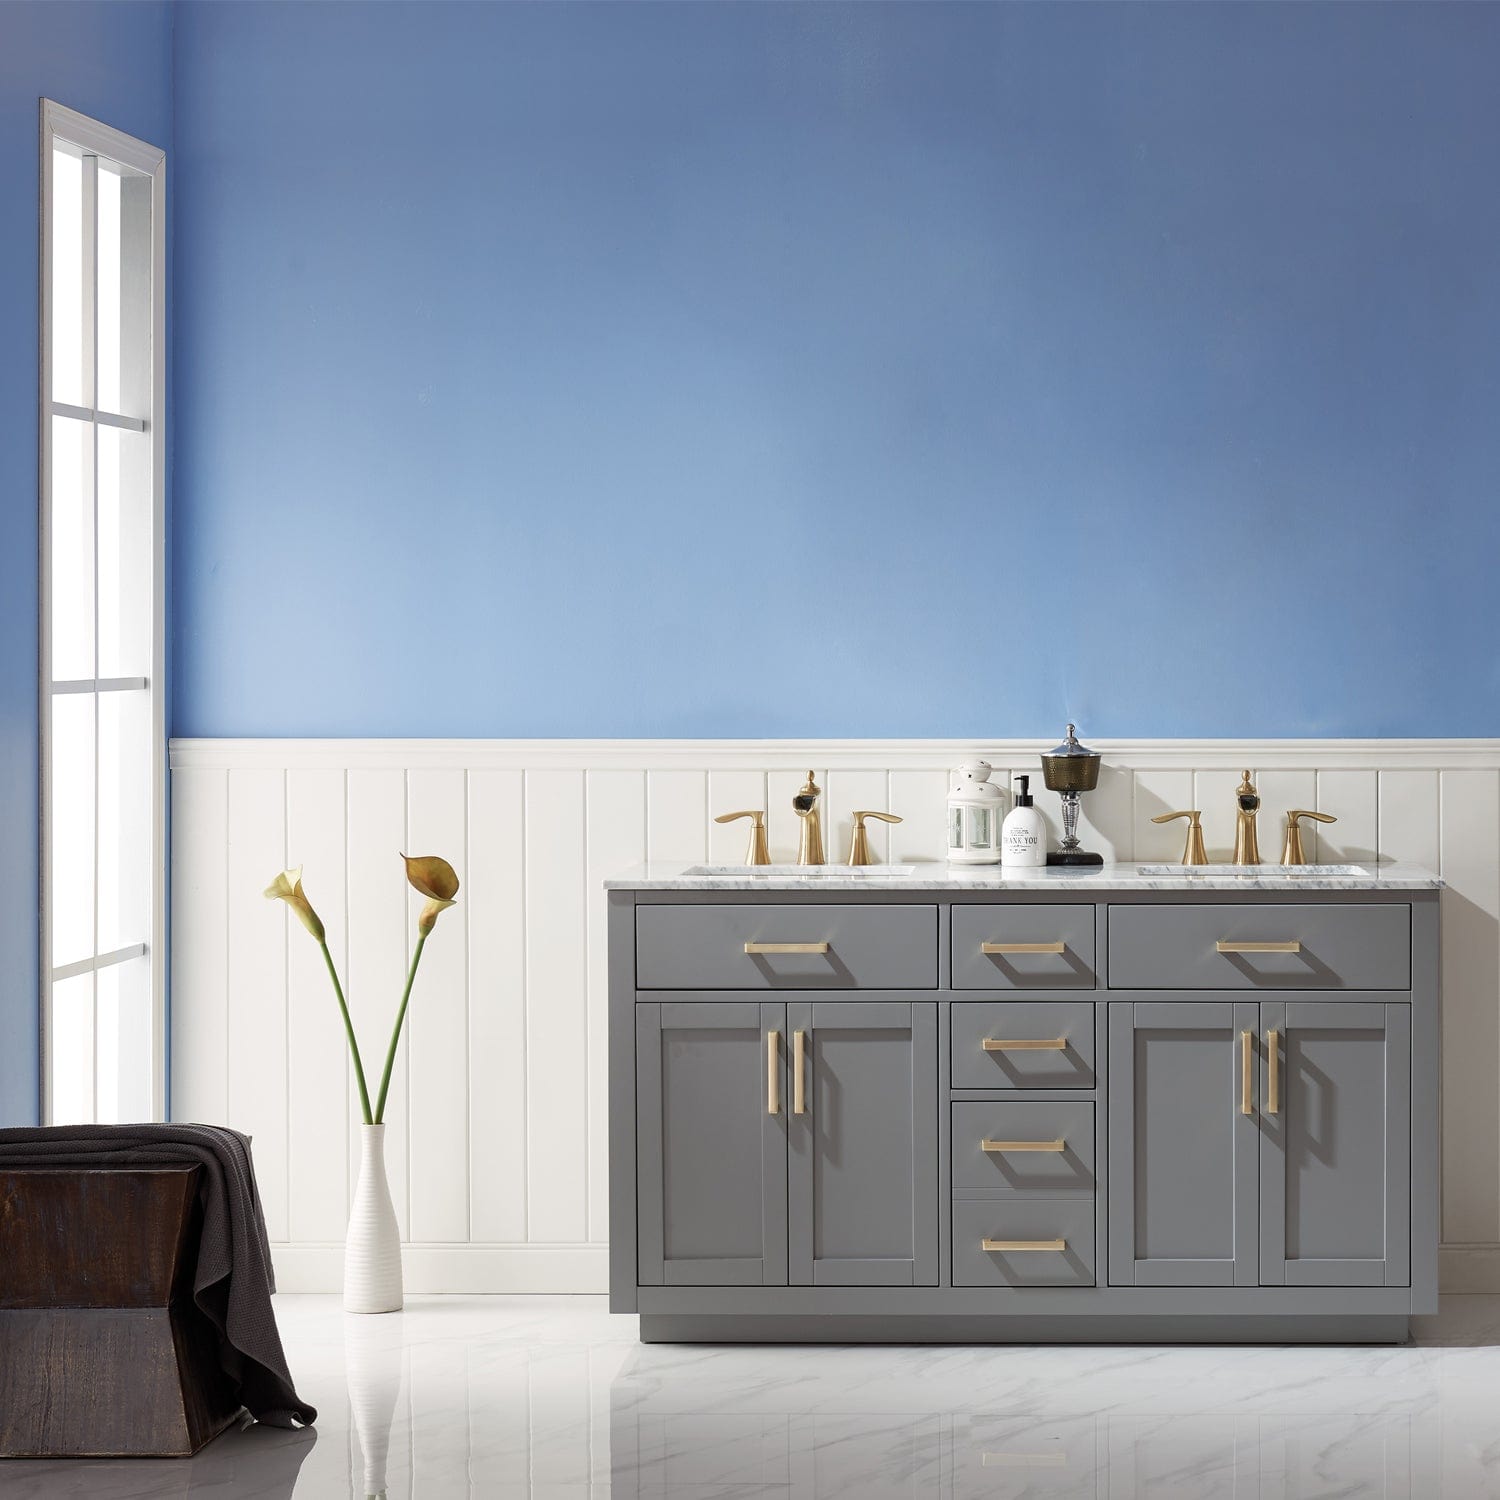 Altair Ivy 60" Double Bathroom Vanity Set in Gray and Carrara White Marble Countertop without Mirror 531060-GR-CA-NM - Molaix631112971225Vanity531060-GR-CA-NM